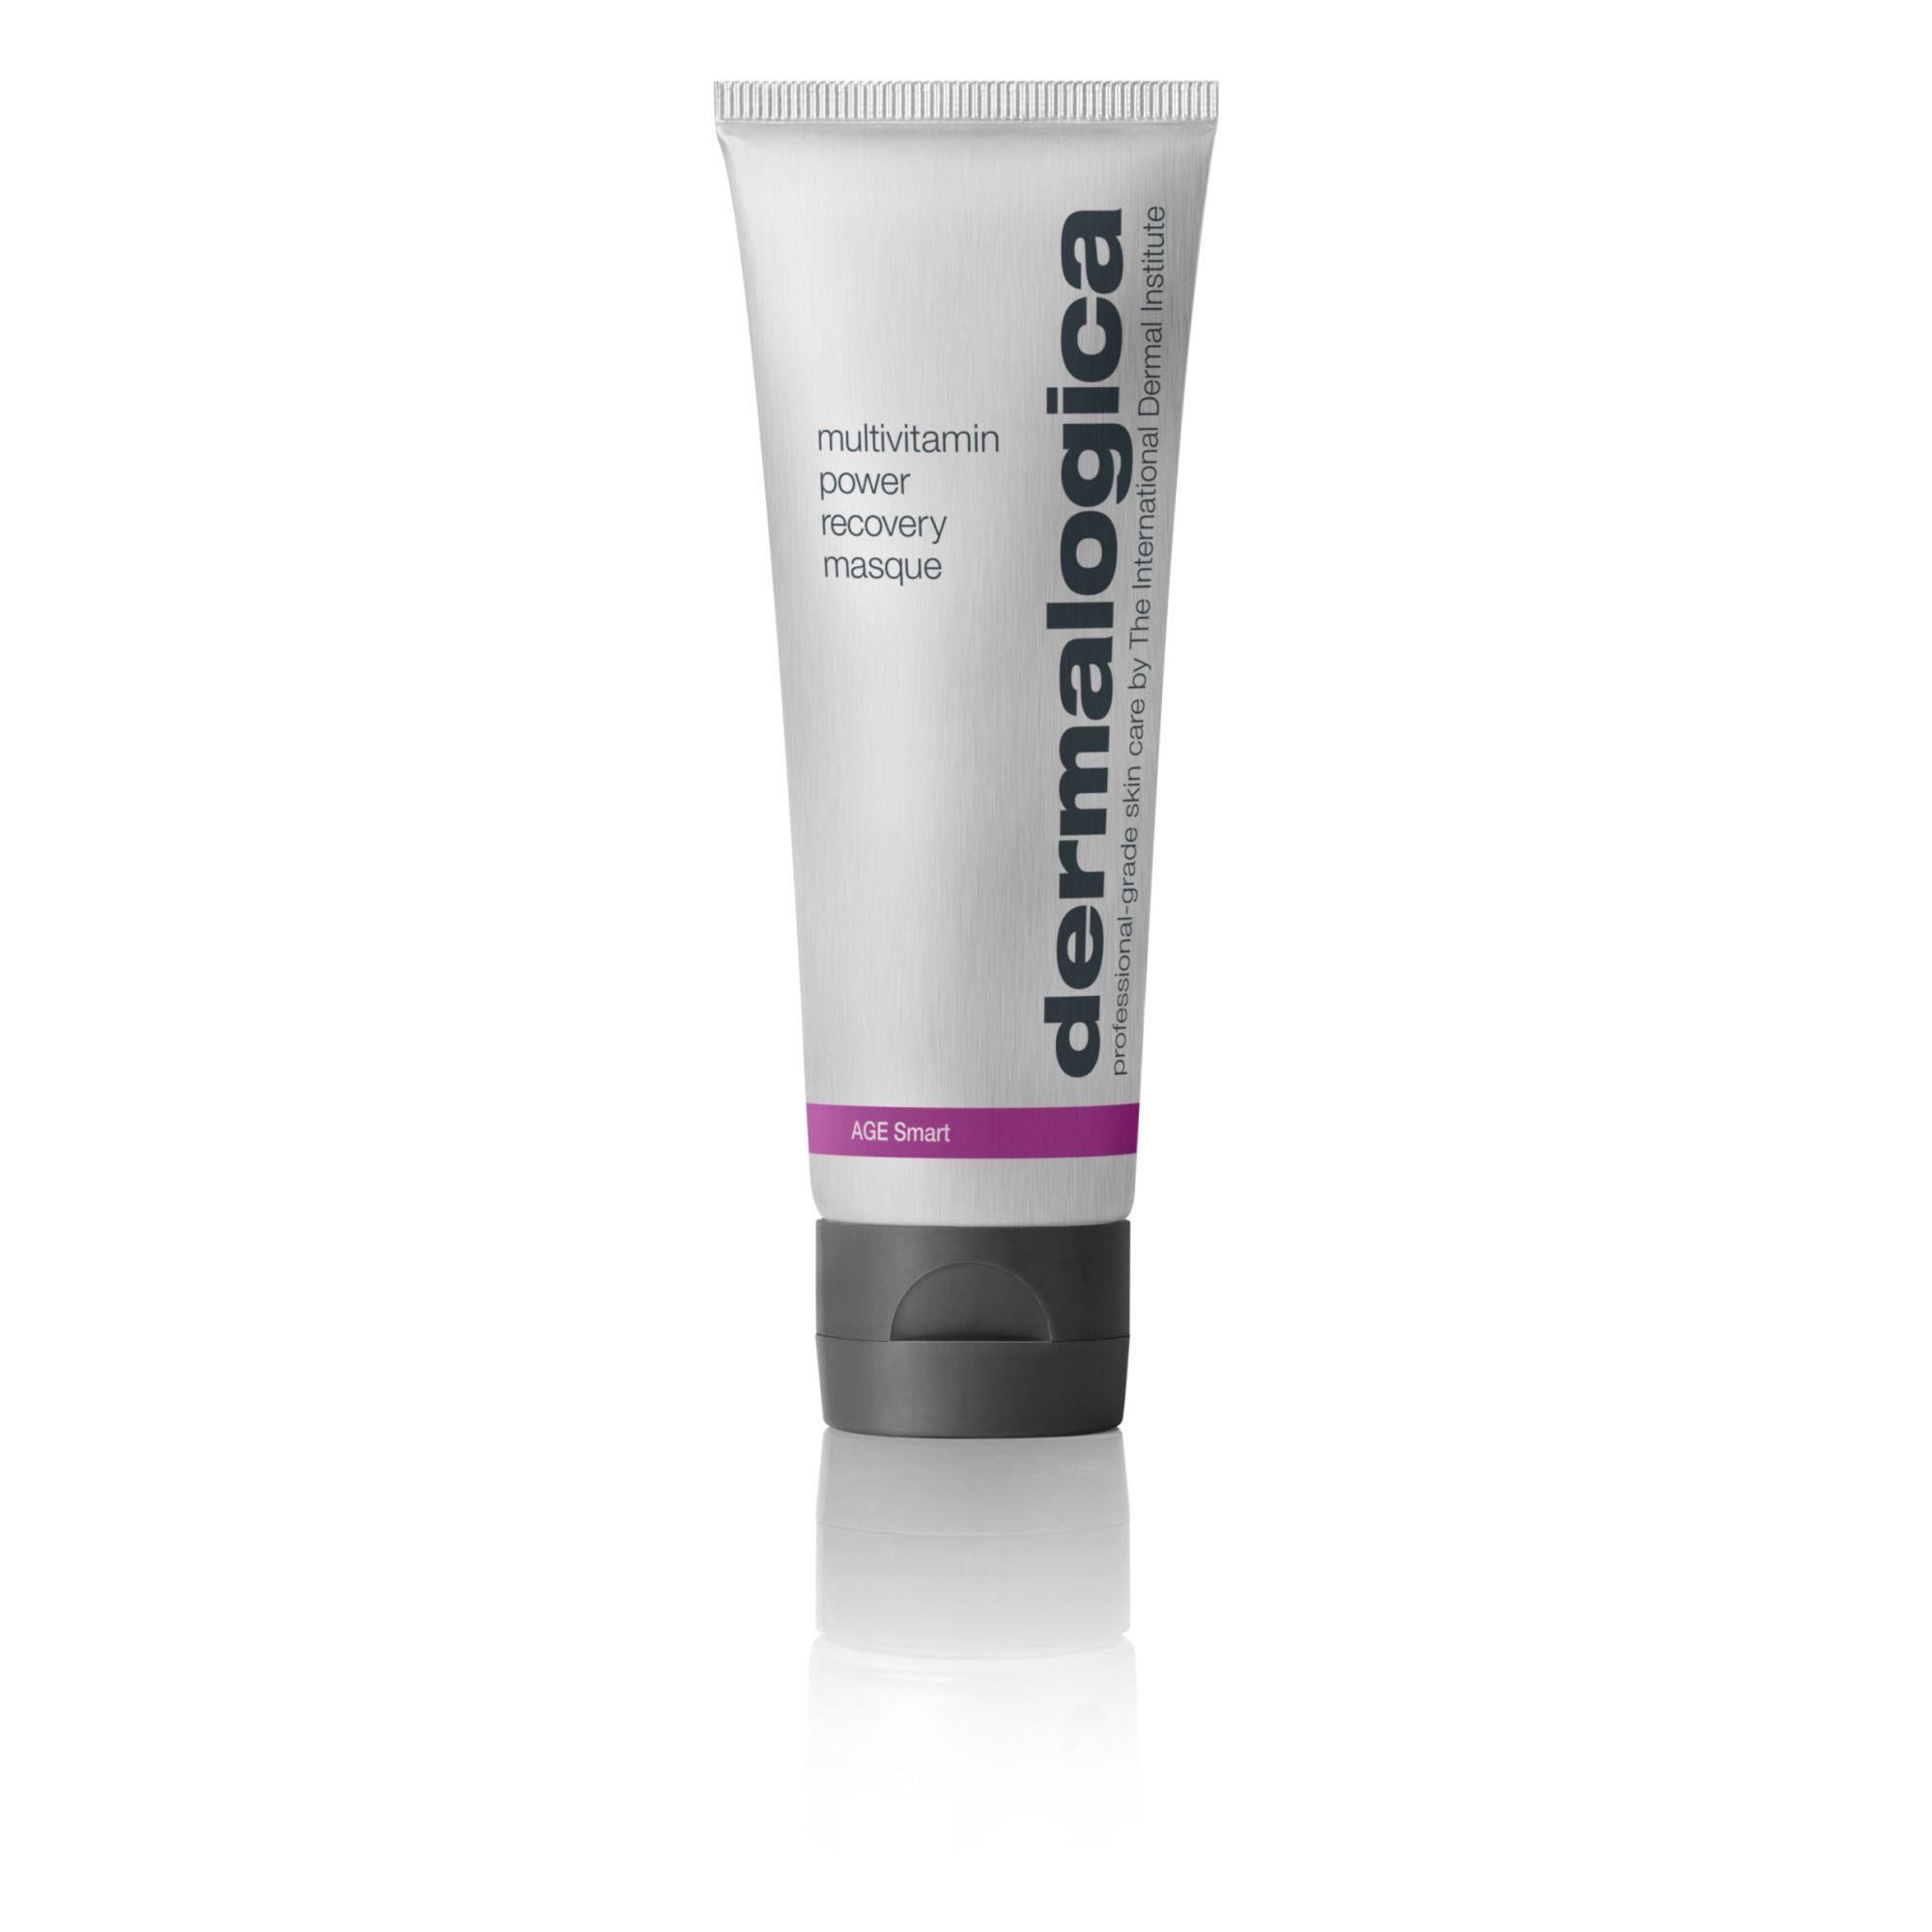 Dermalogica - Masque multivitaminé power recovery - 75 ml - Blanc